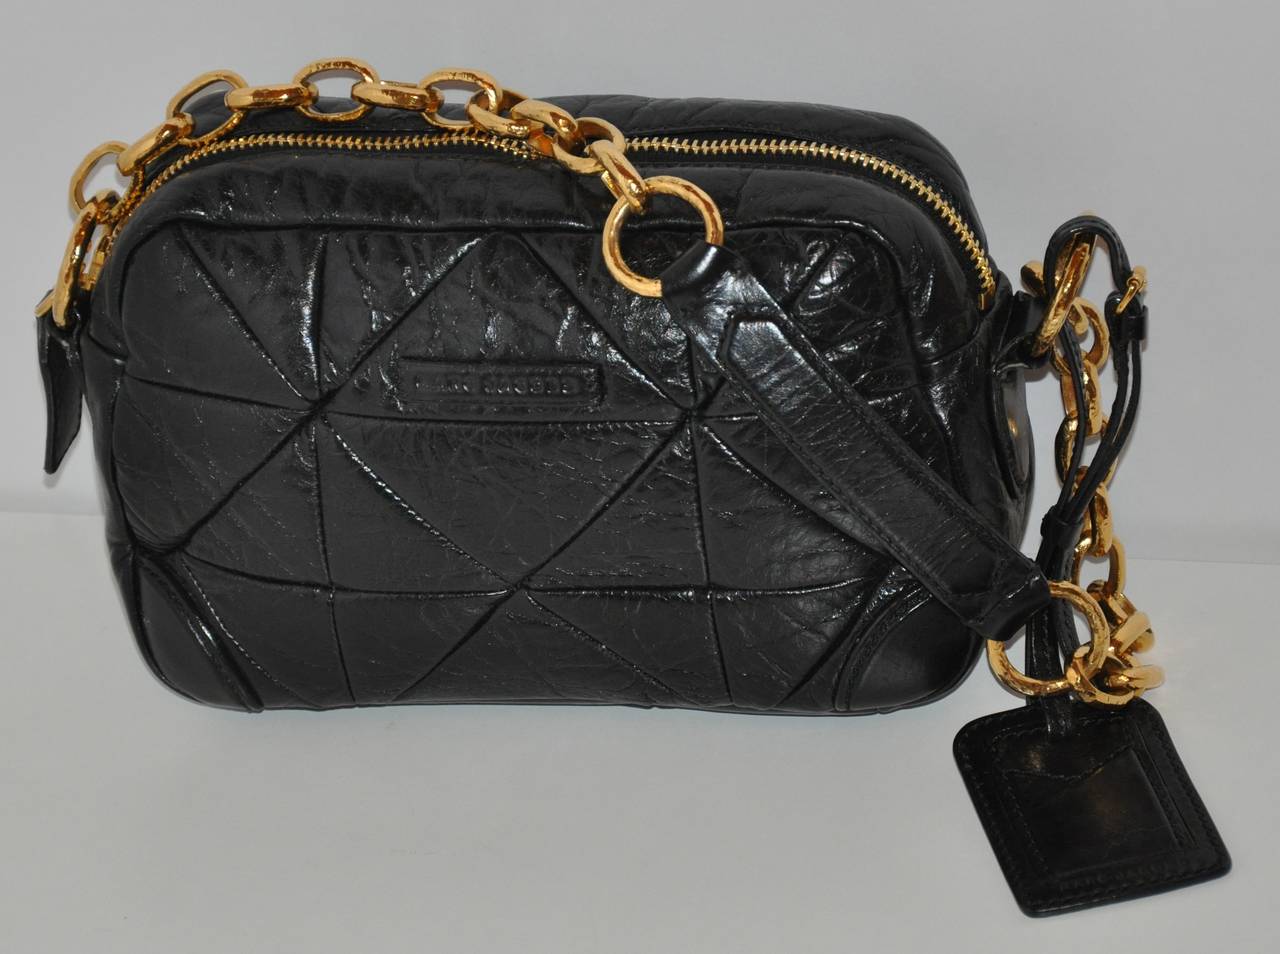 Marc Jacobs black calfskin quilted shoulder bag is accented with gilded gold hardware. The shoulder bag has a attached leather 